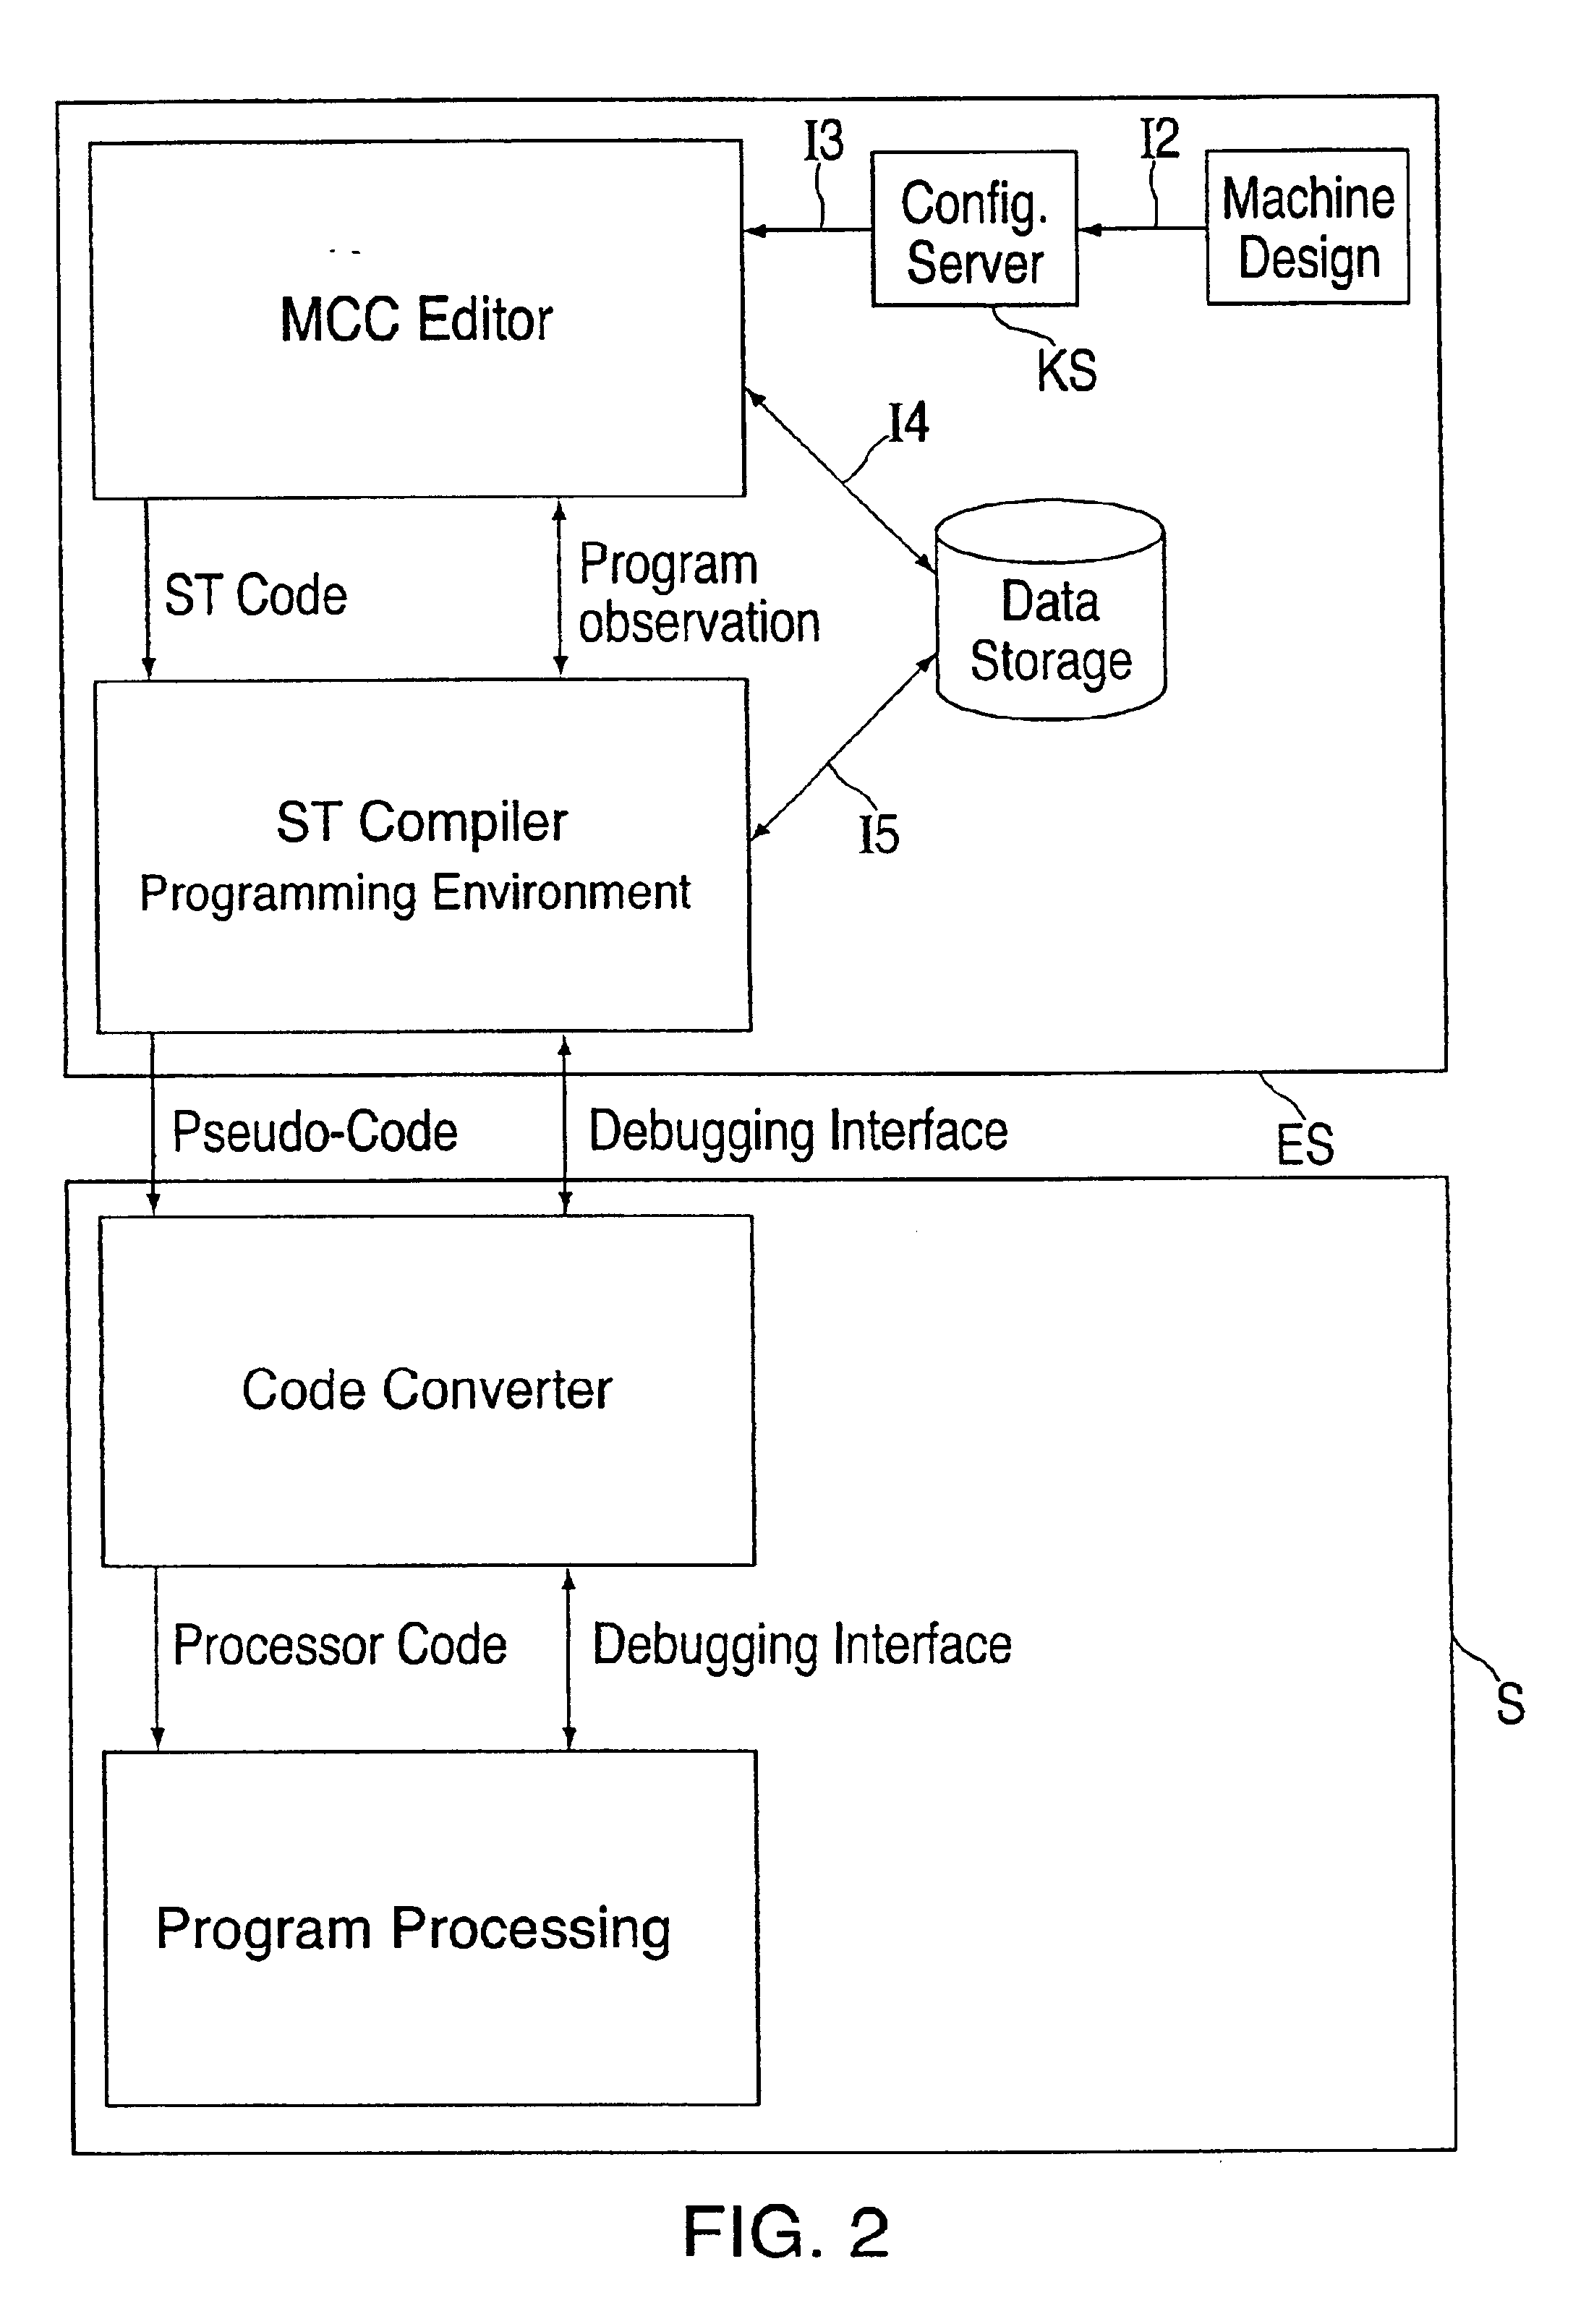 Flowchart programming for industrial controllers, in particular motion controllers